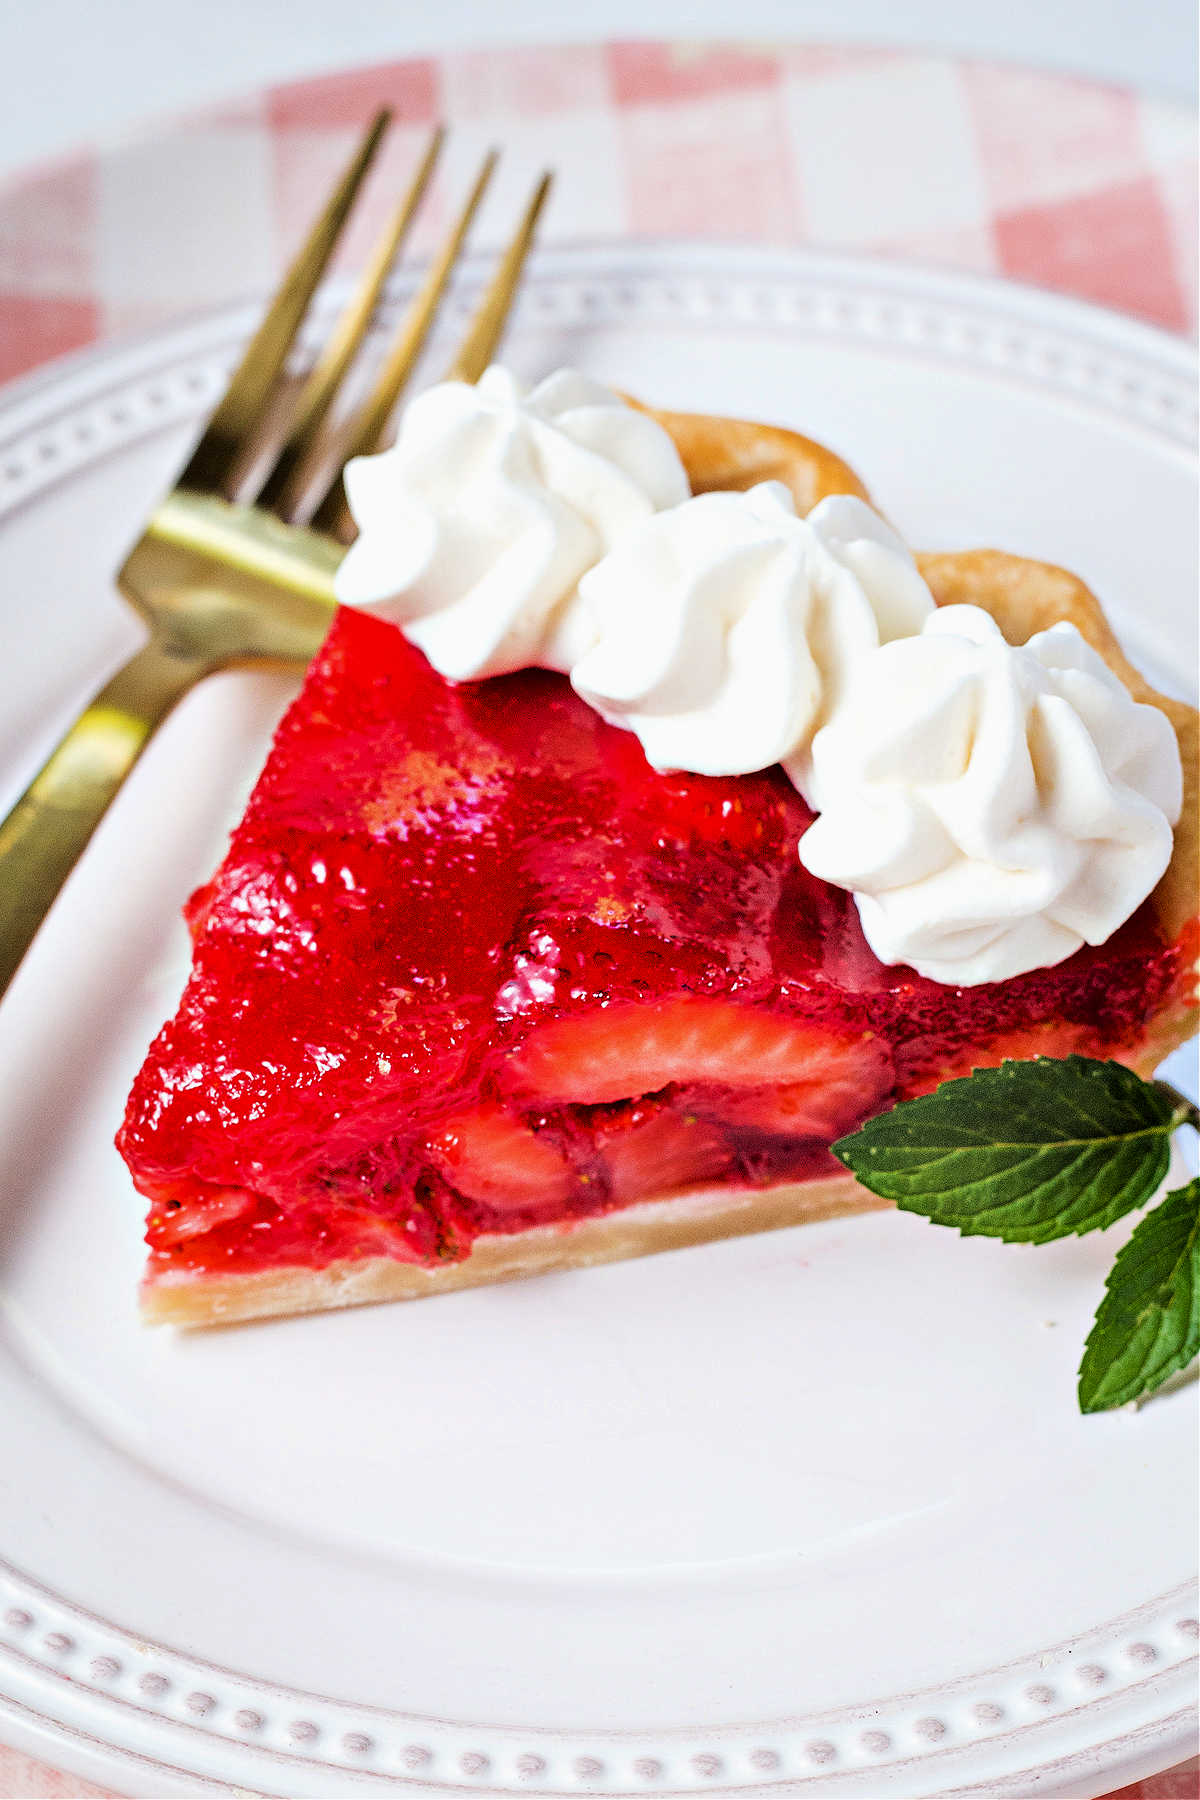 a slice of strawberry pie with dollops of whipped cream and a sprig of mint on a plate.